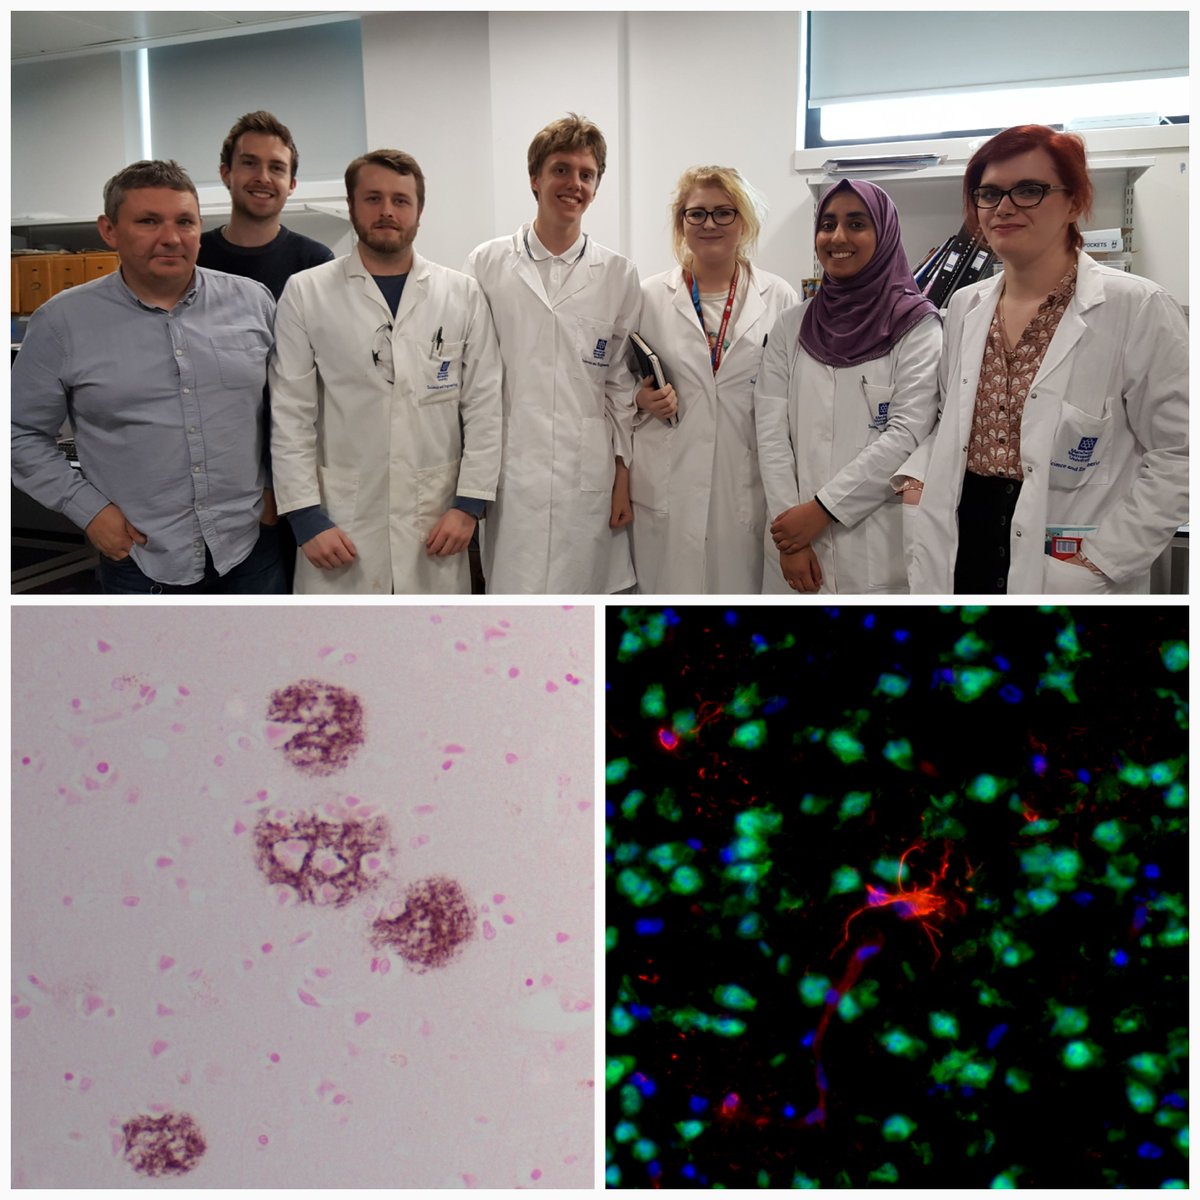 Thanks to the students that attended the Neuroscience Skills Workshop! Some lovely amyloid & astrocyte staining 👩‍🔬👨‍🔬 #MMU_SciEngAward